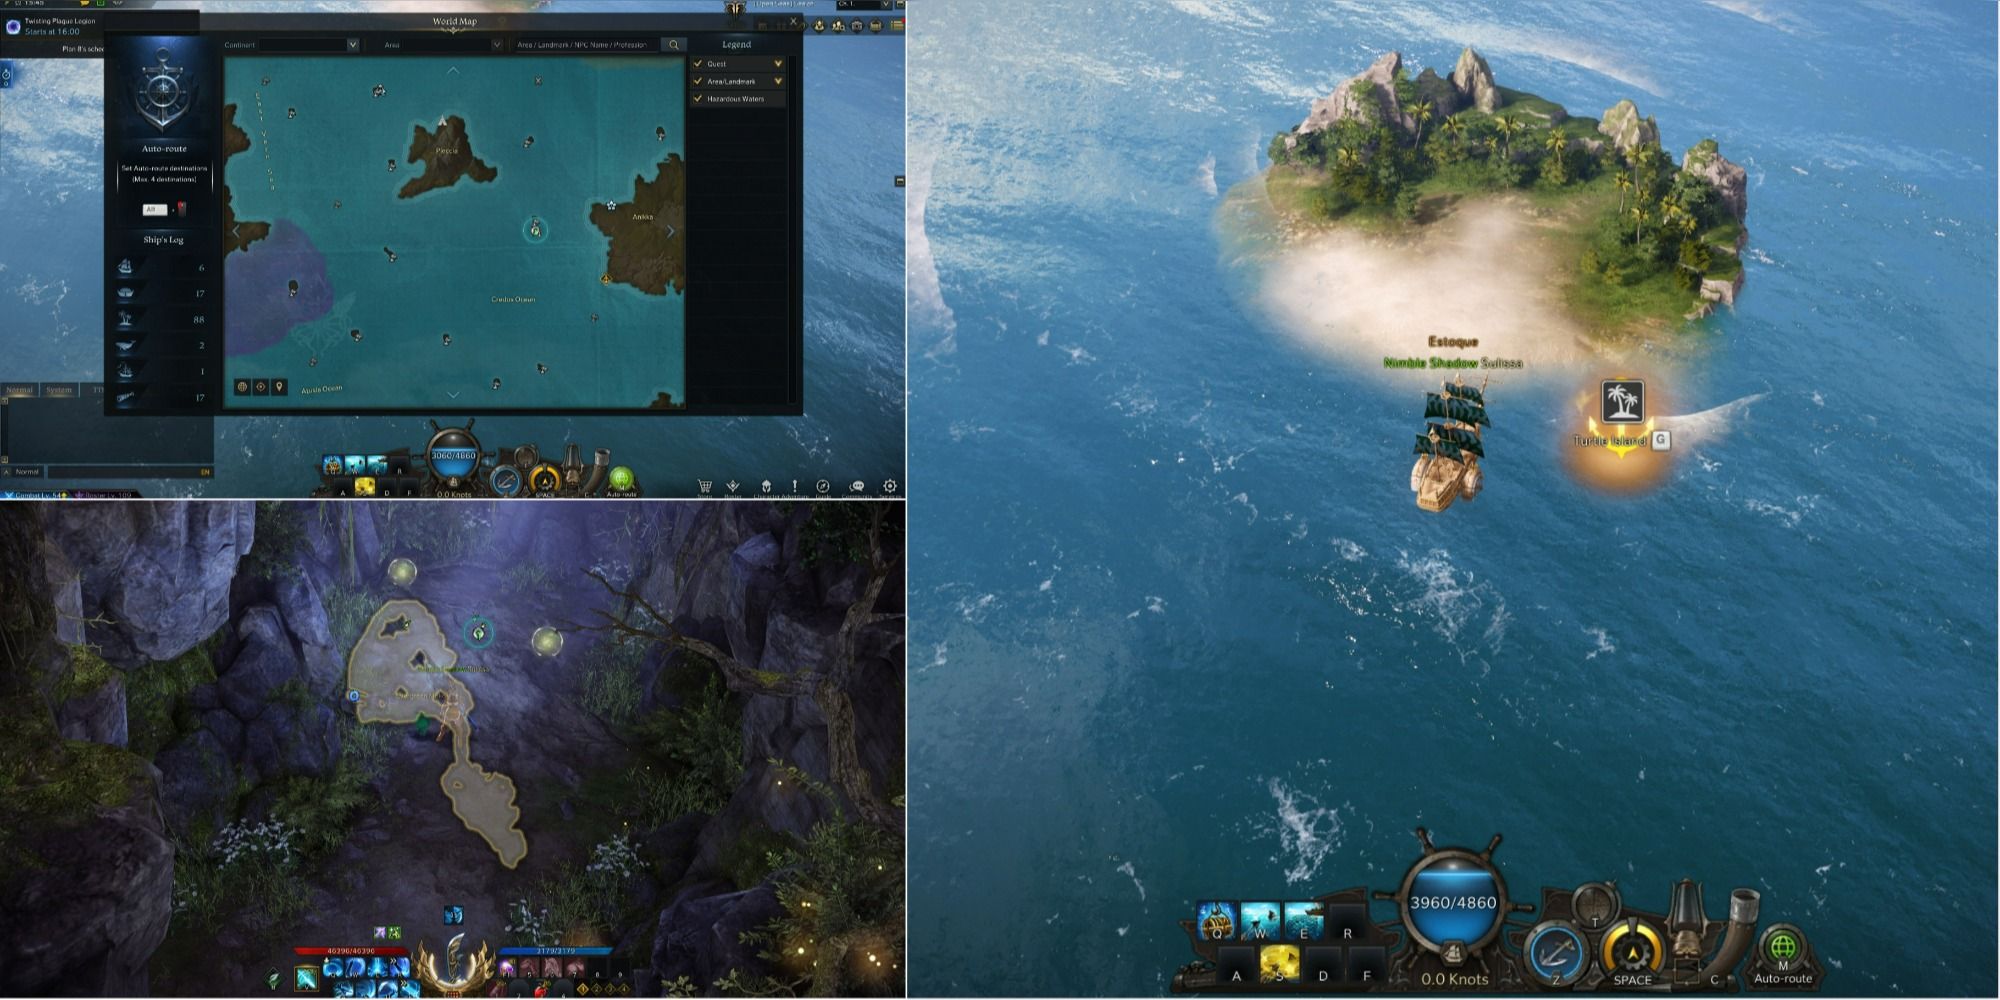 Lost Ark split image of Turtle Island location on open seas and map and Mokoko Seeds 2 and 3 location